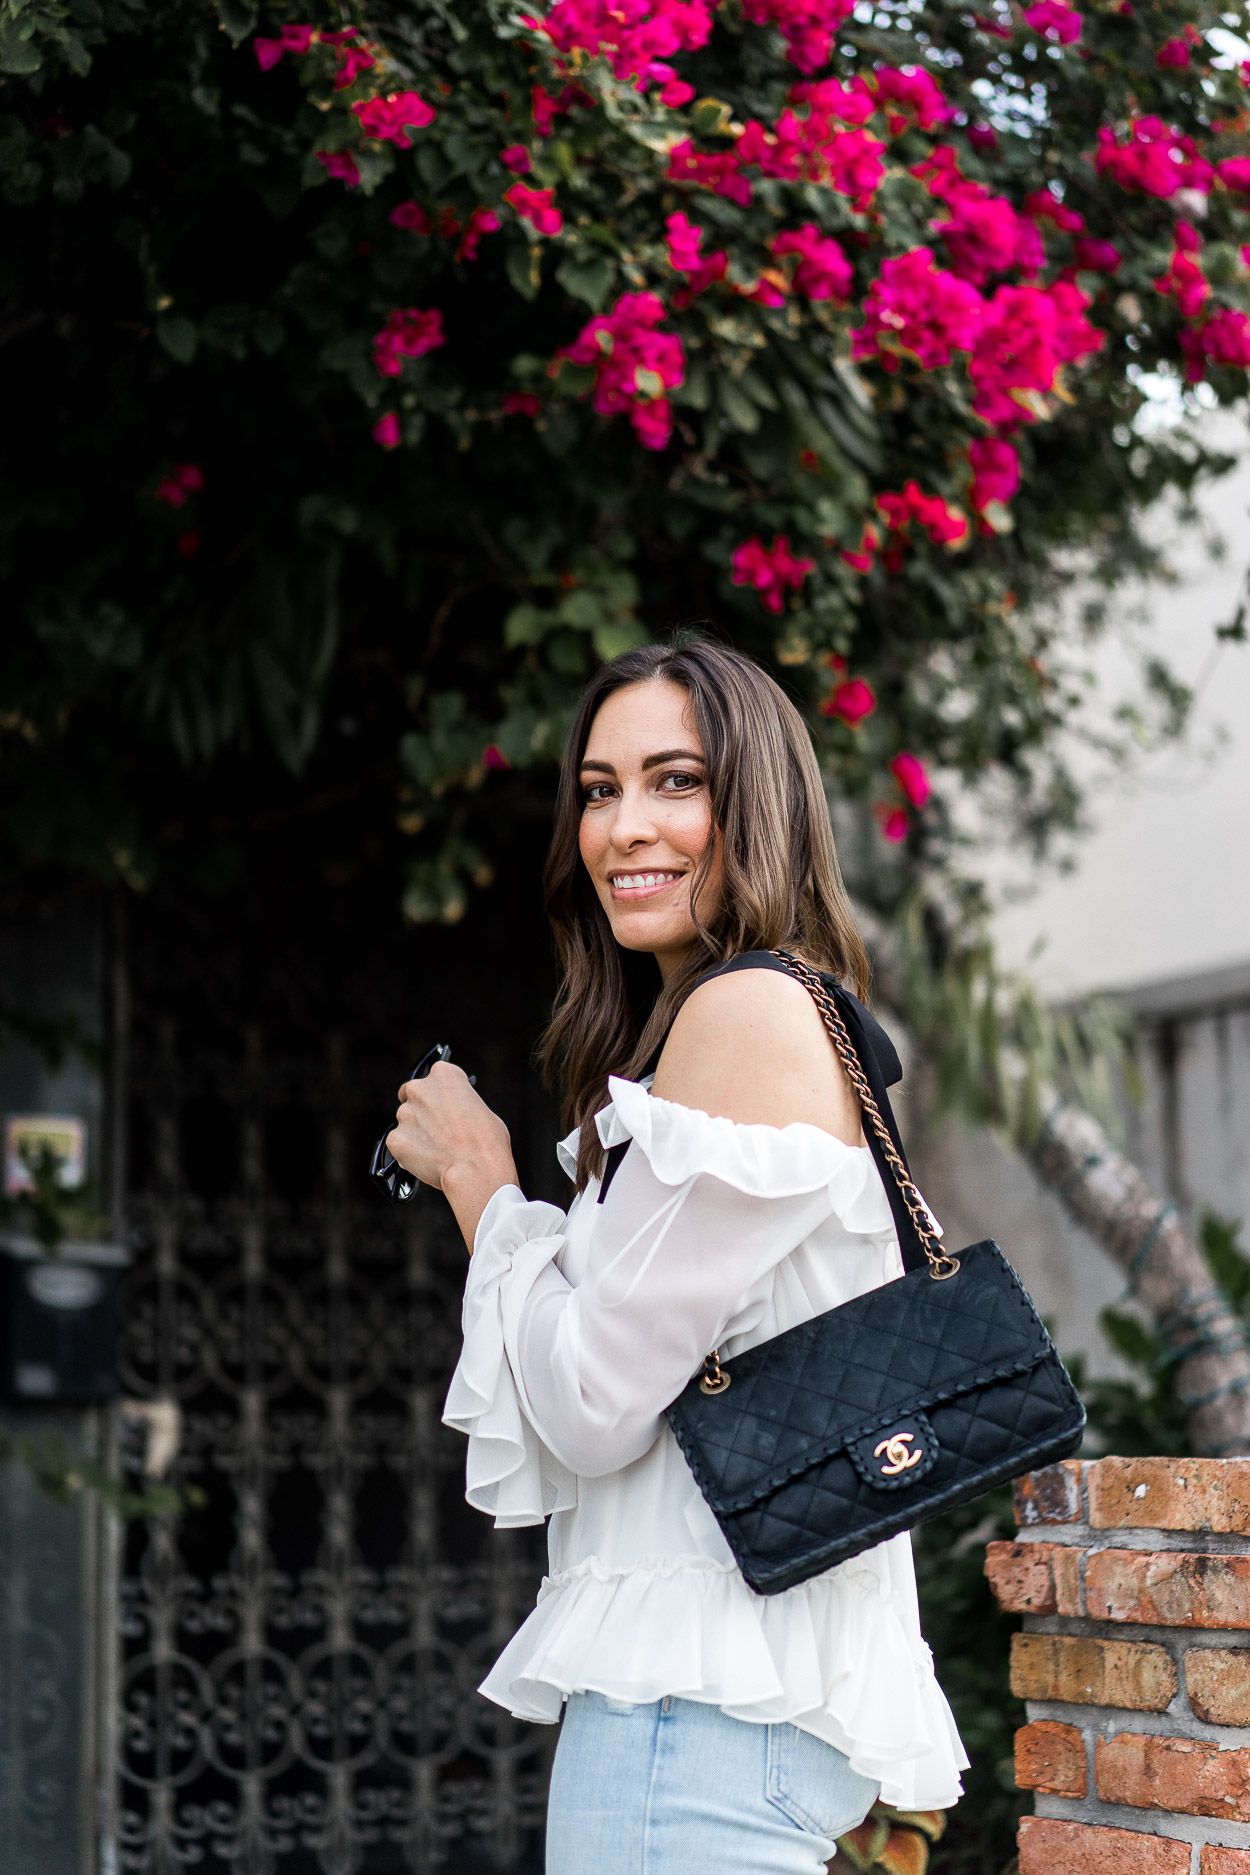 Cece ruffled blouse with classic Chanel bag